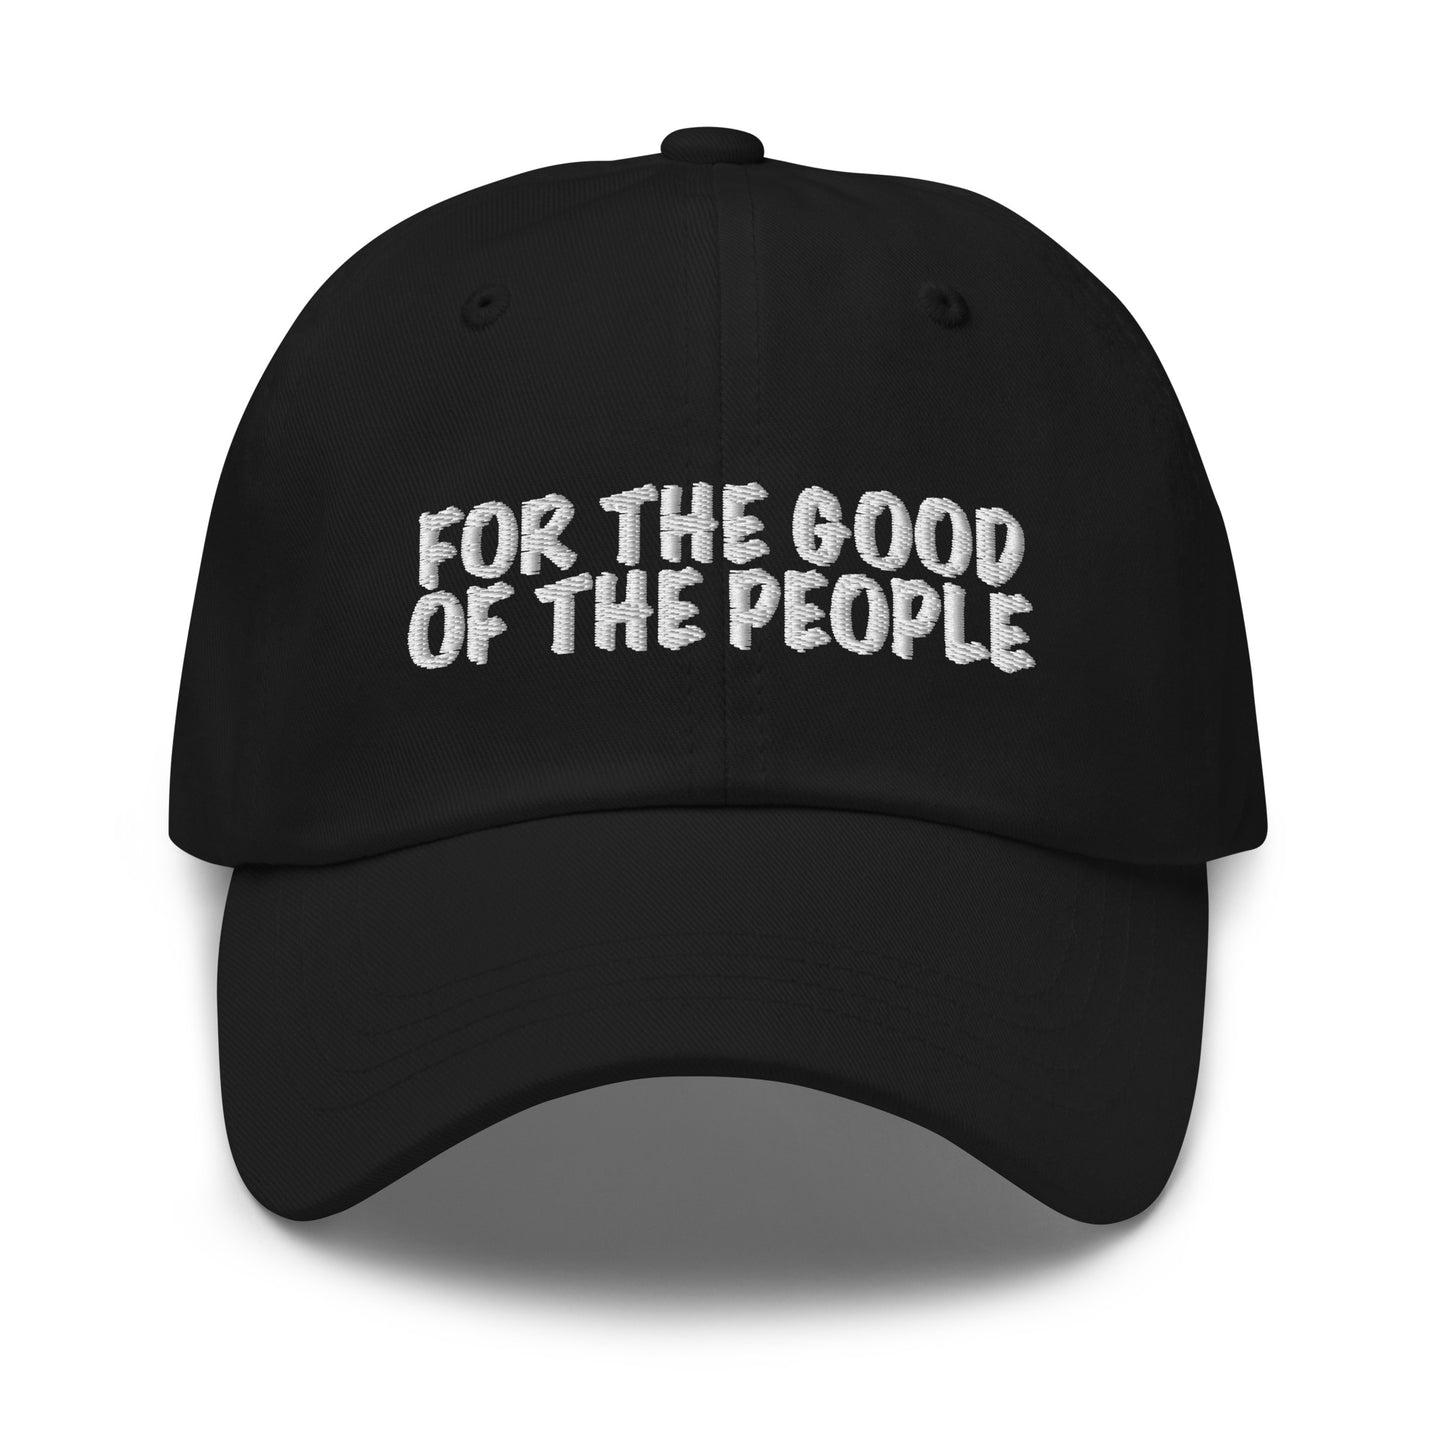 For the good of the people embroidered in white on front of black dad hat.